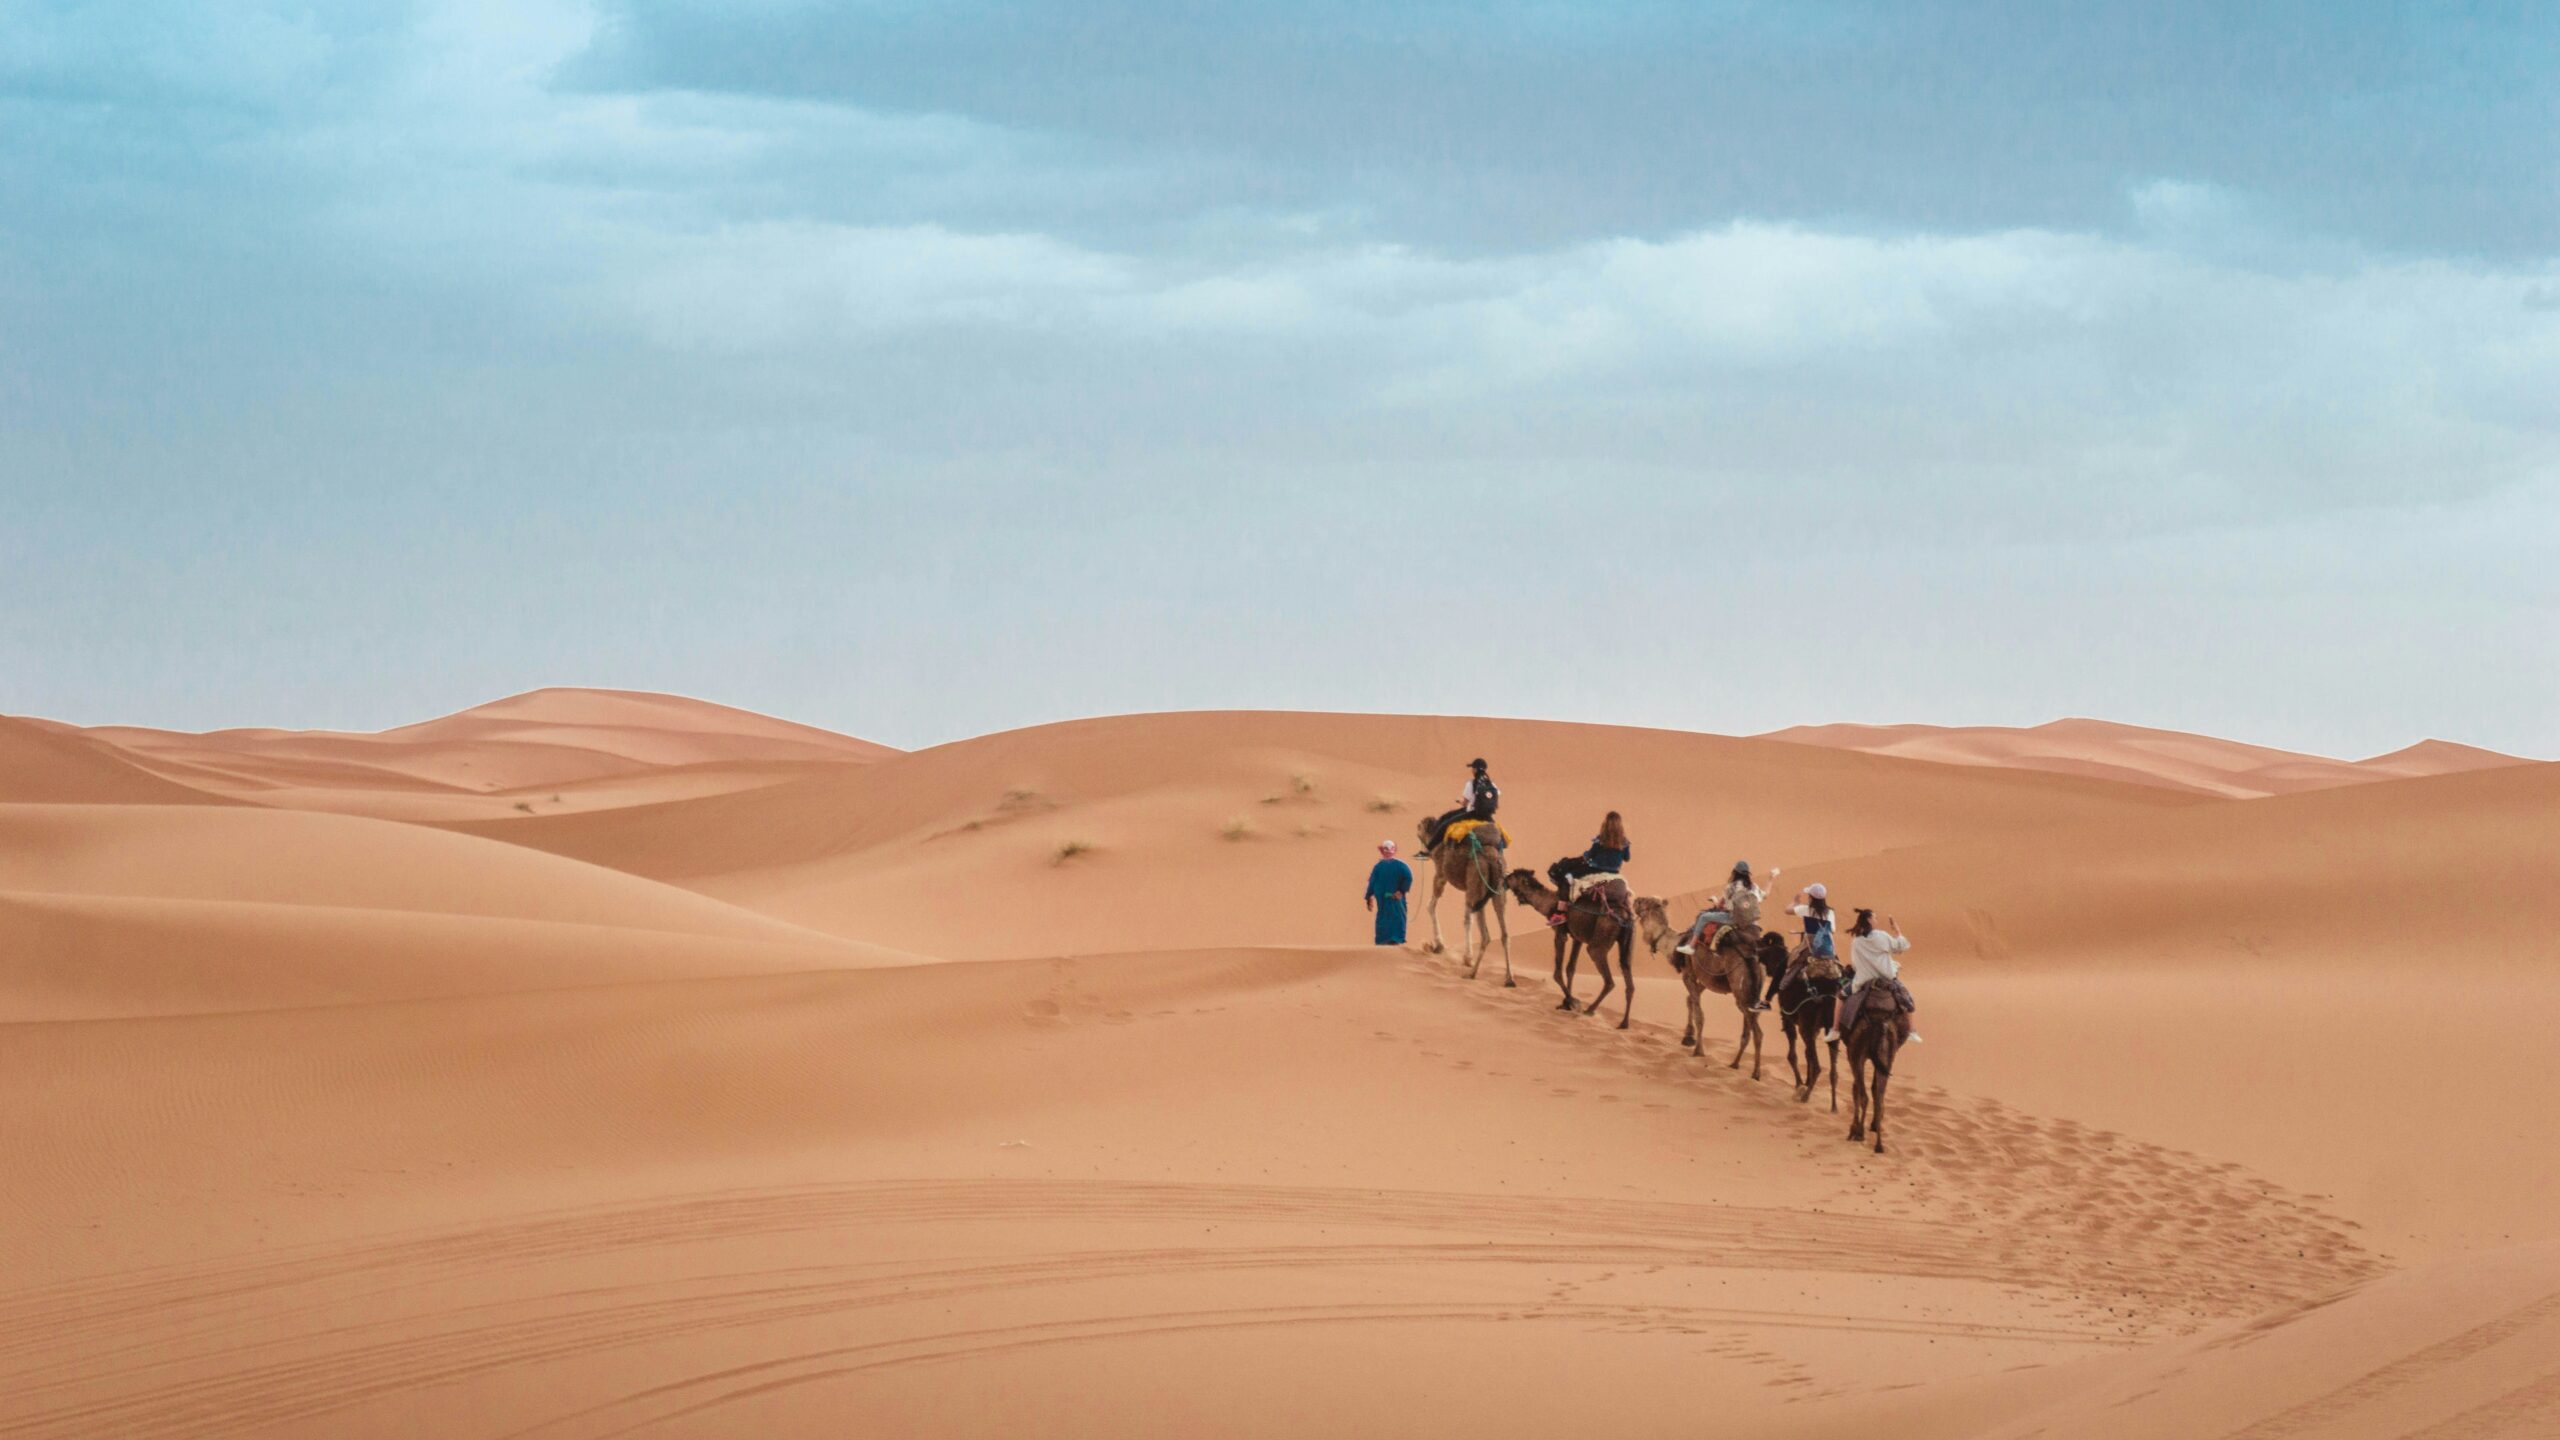 Imago Travel: Your Go-To Travel Agency for Bespoke Private Tours in Morocco